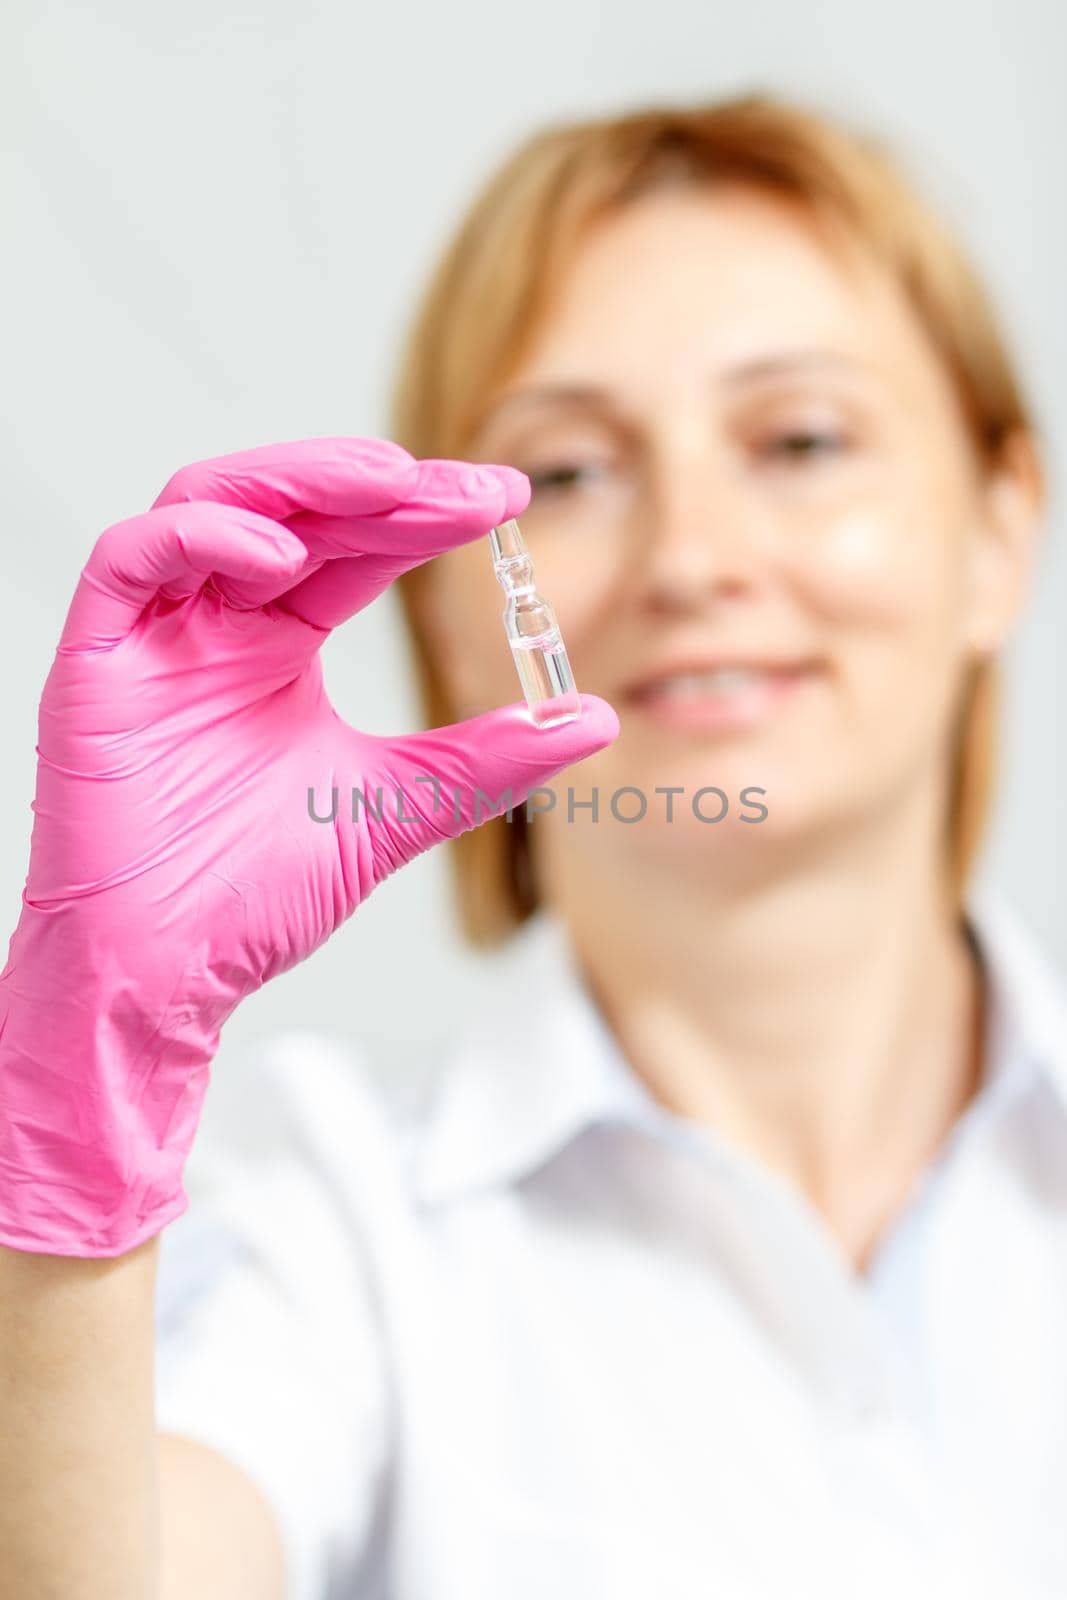 Smiling female doctor in pink glove holding ampoule with medicine. Selective focus on ampoule